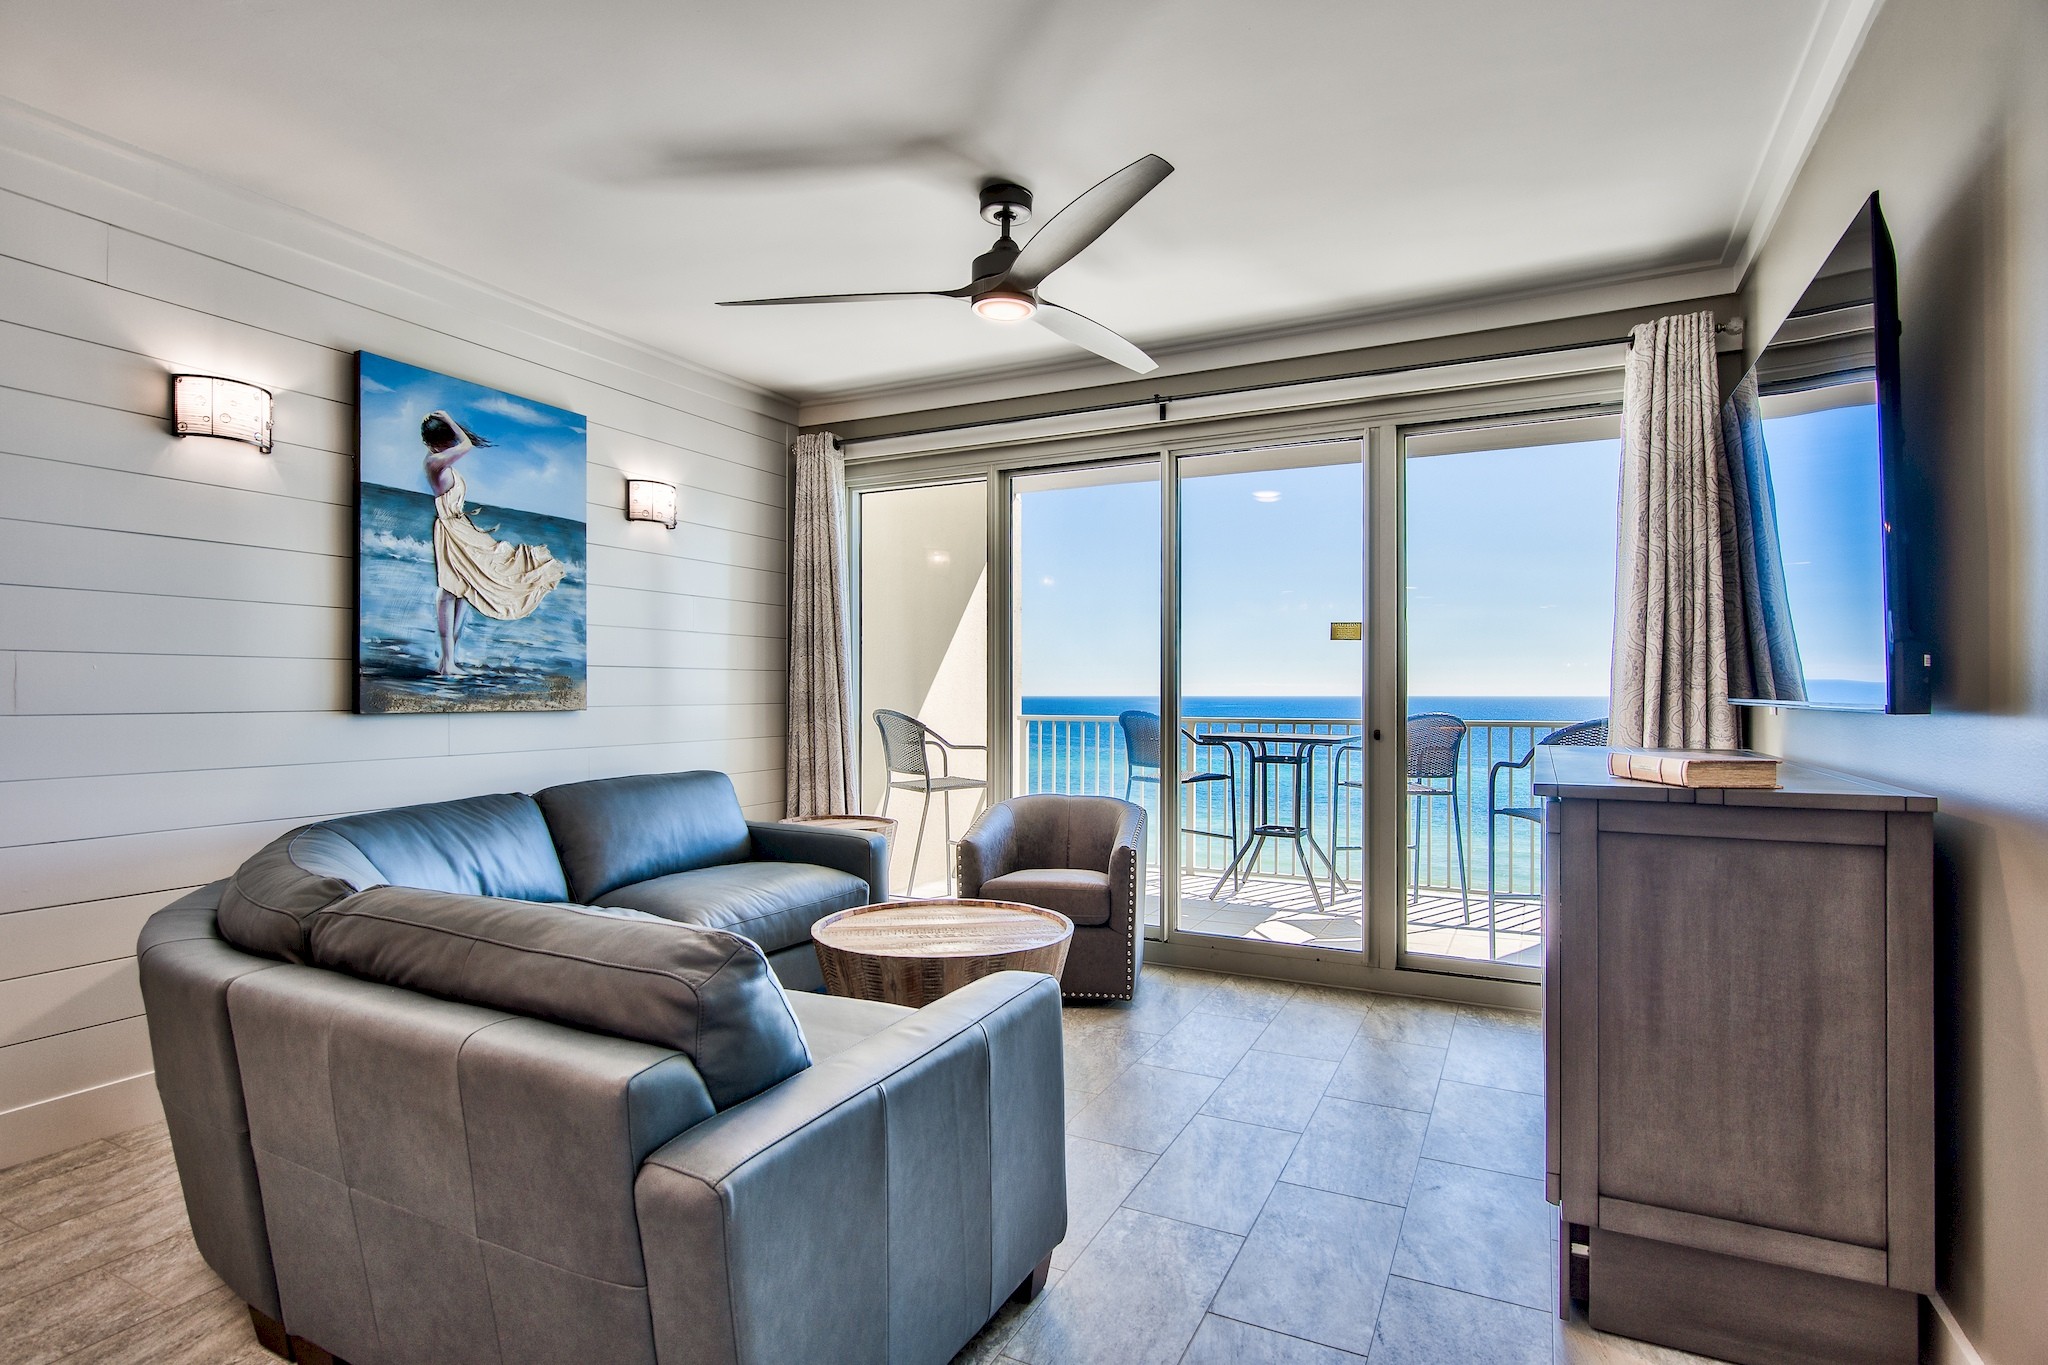 Incredible Gulf Views from the living room